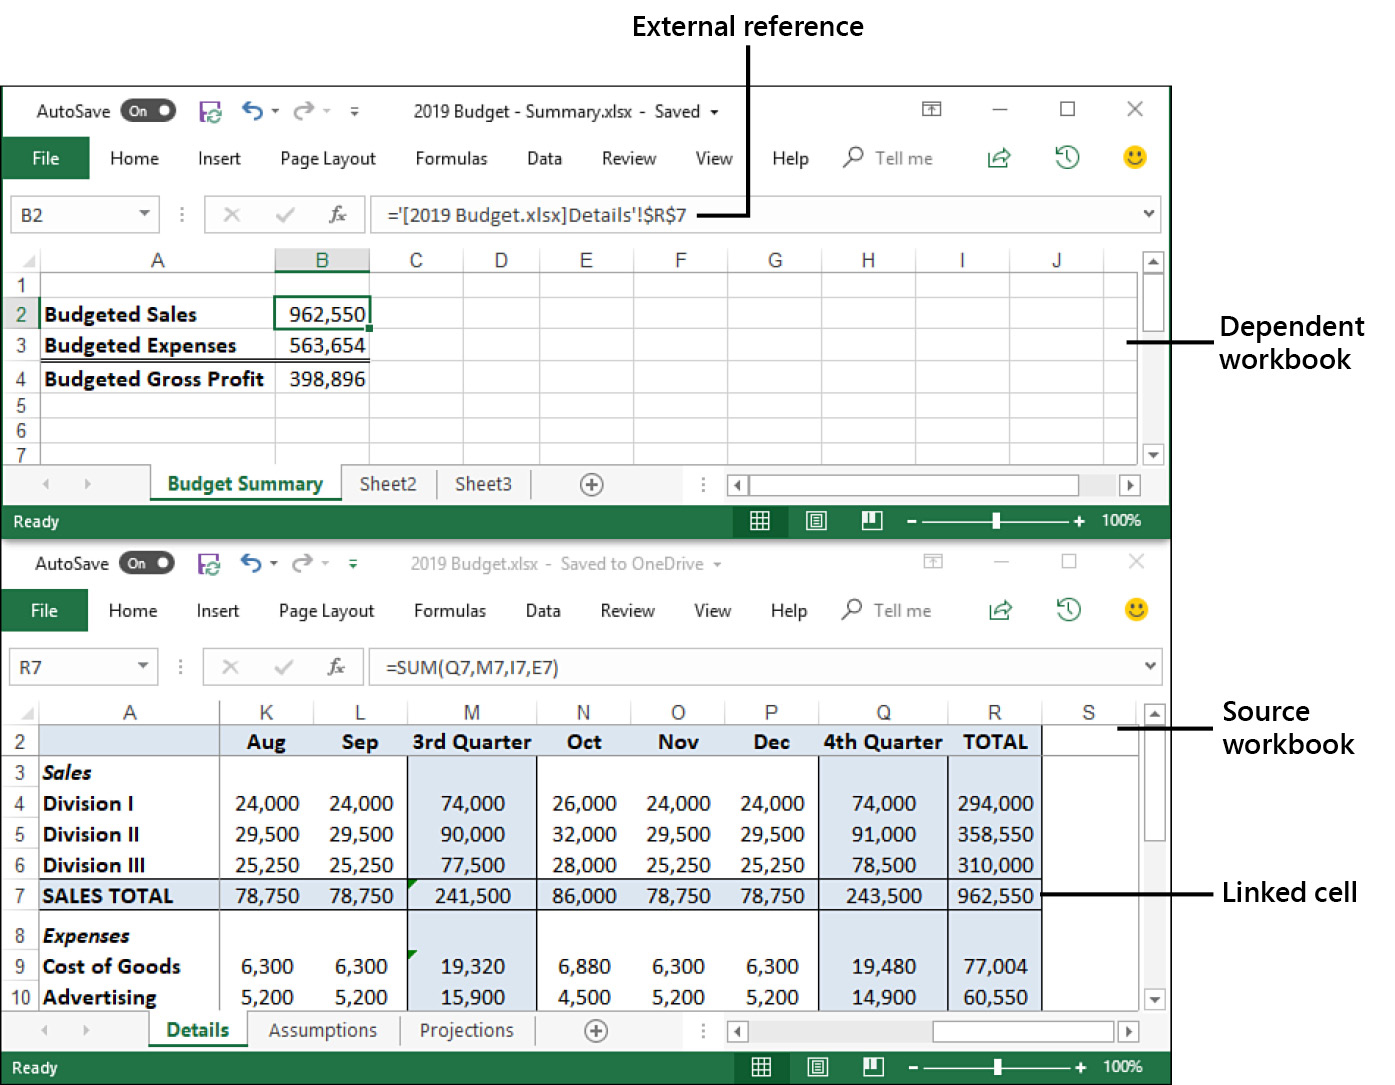 The figure shows two Excel workbooks. The top workbook’s selected cell contains a formula that references cell R7 in the bottom workbook.